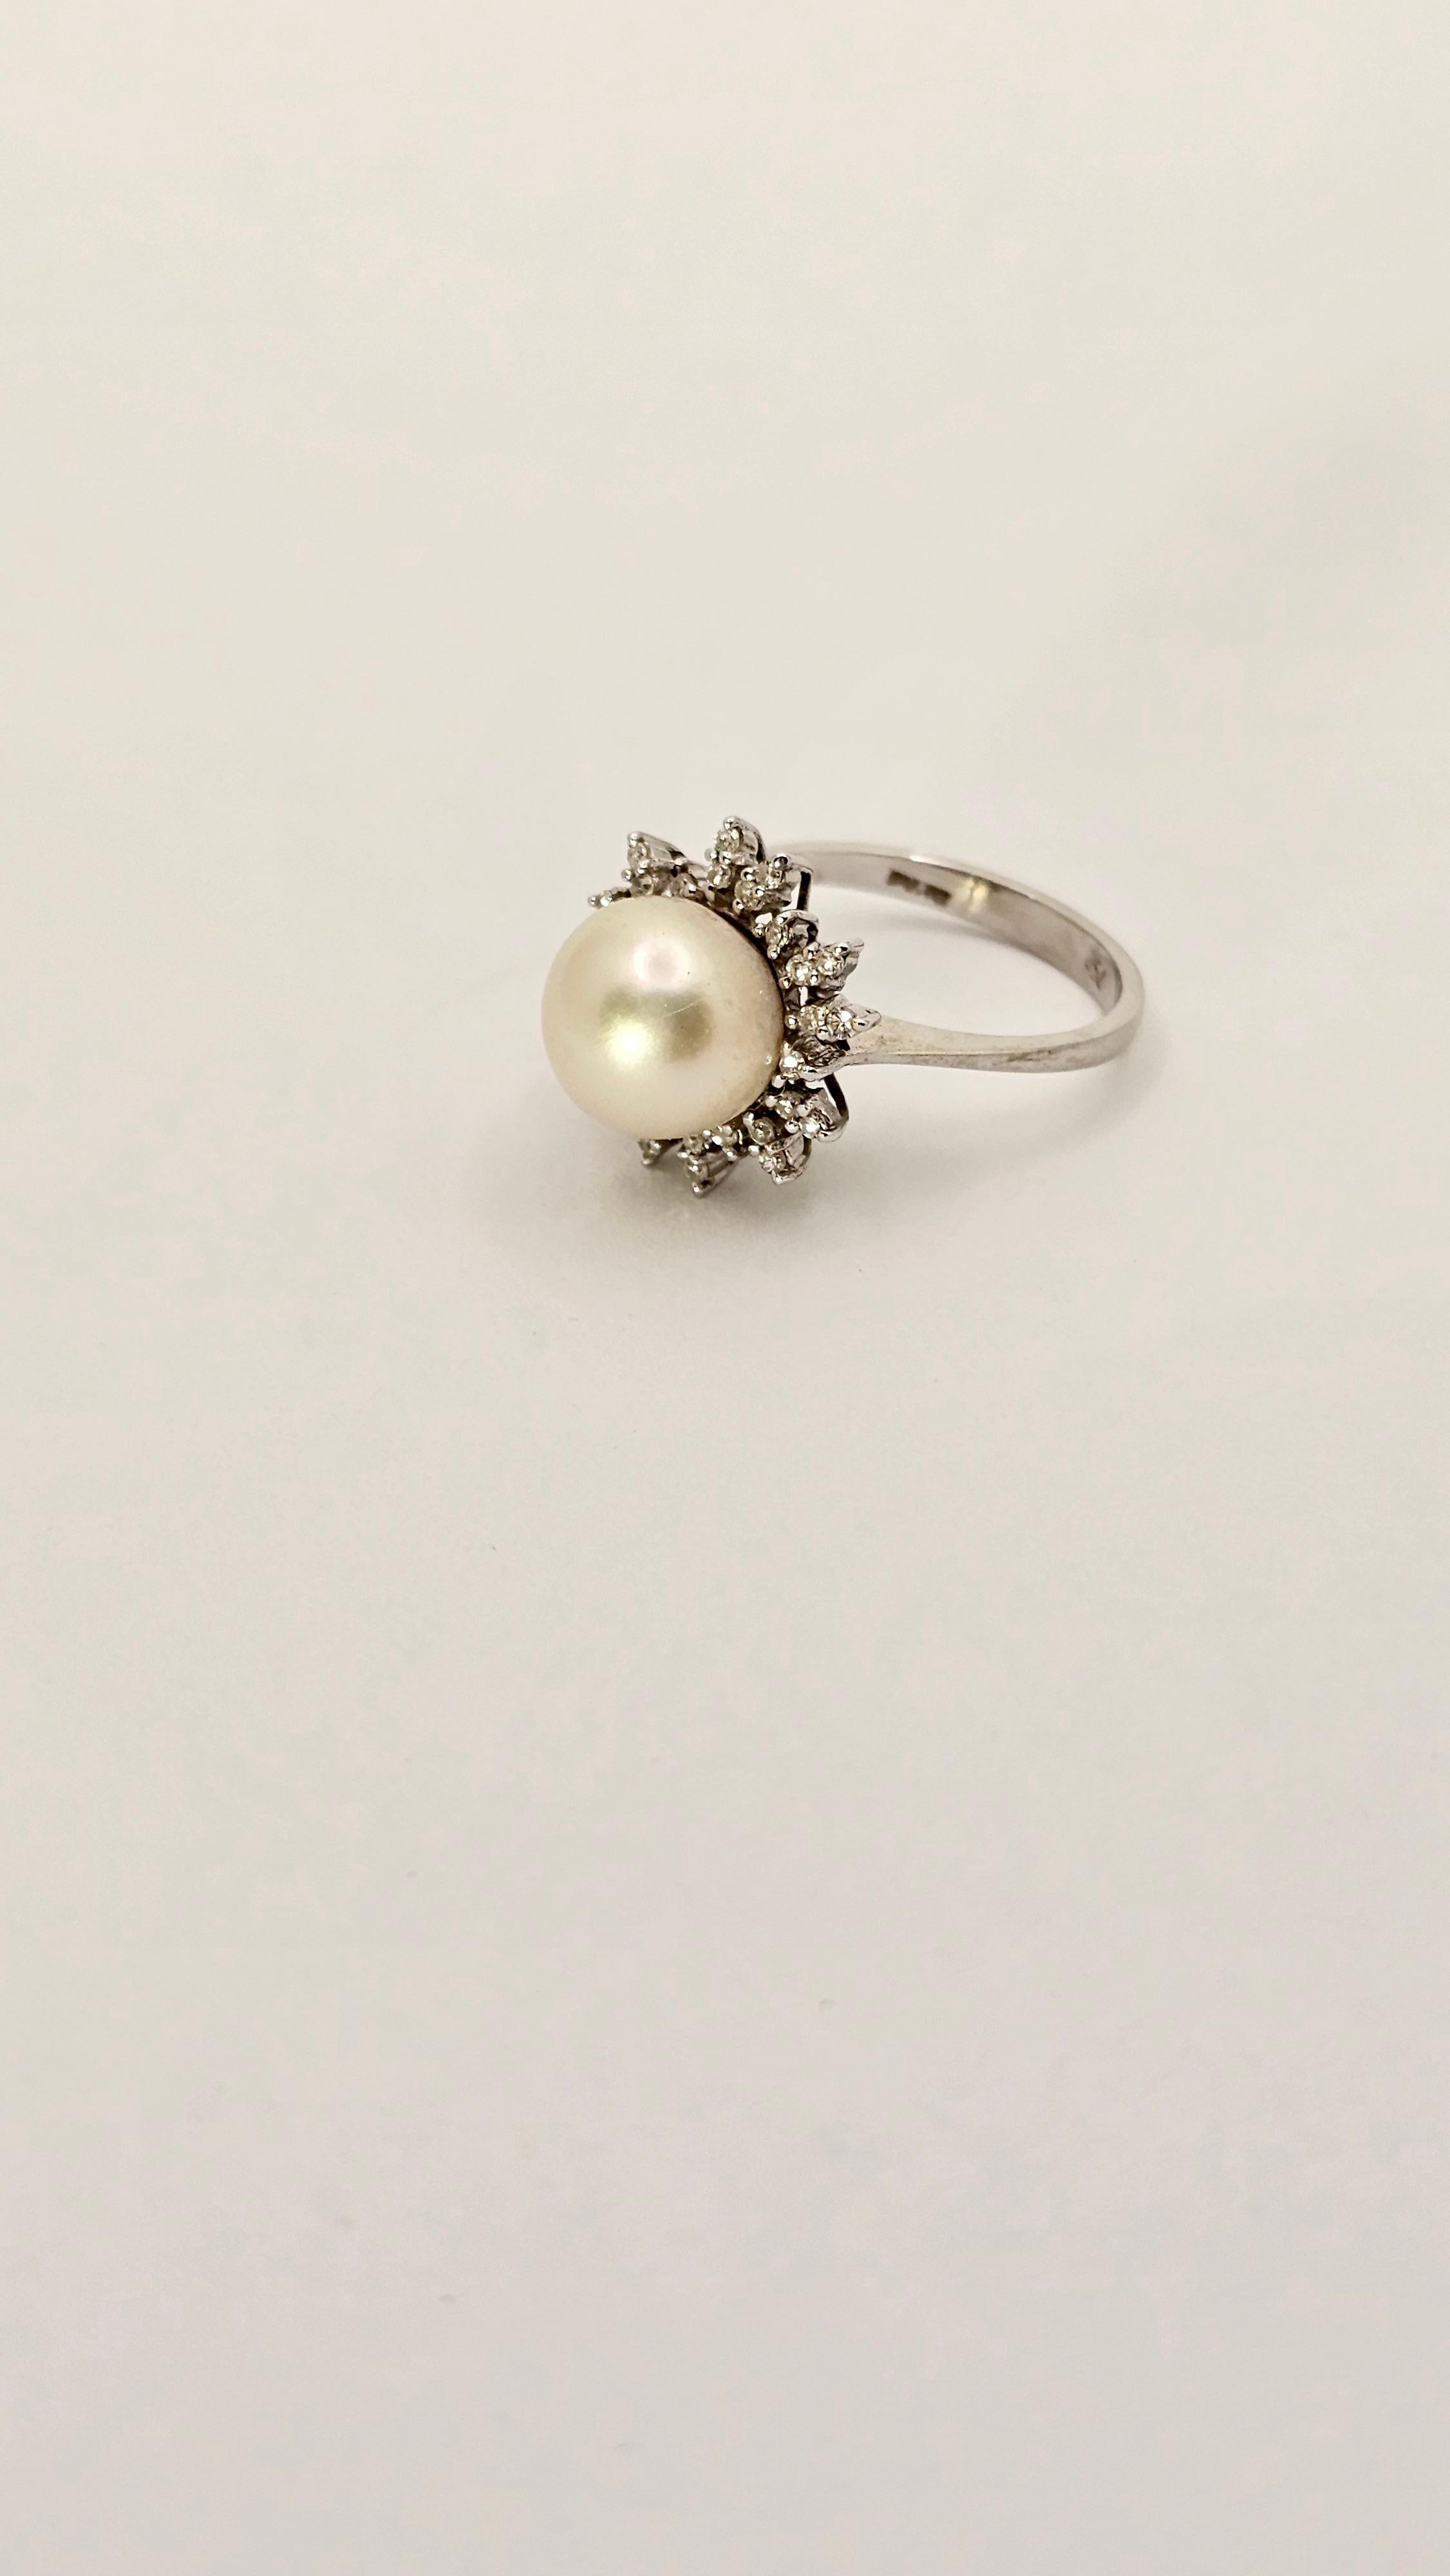 A vintage, 1950s-era ring made of 18 kt white gold weighing 4.80 grams.
The design of this jewelry is typical of its era, the Diamonds are arranged in a frame so as to further bring out all the reflections of the pearl.
The central part has a